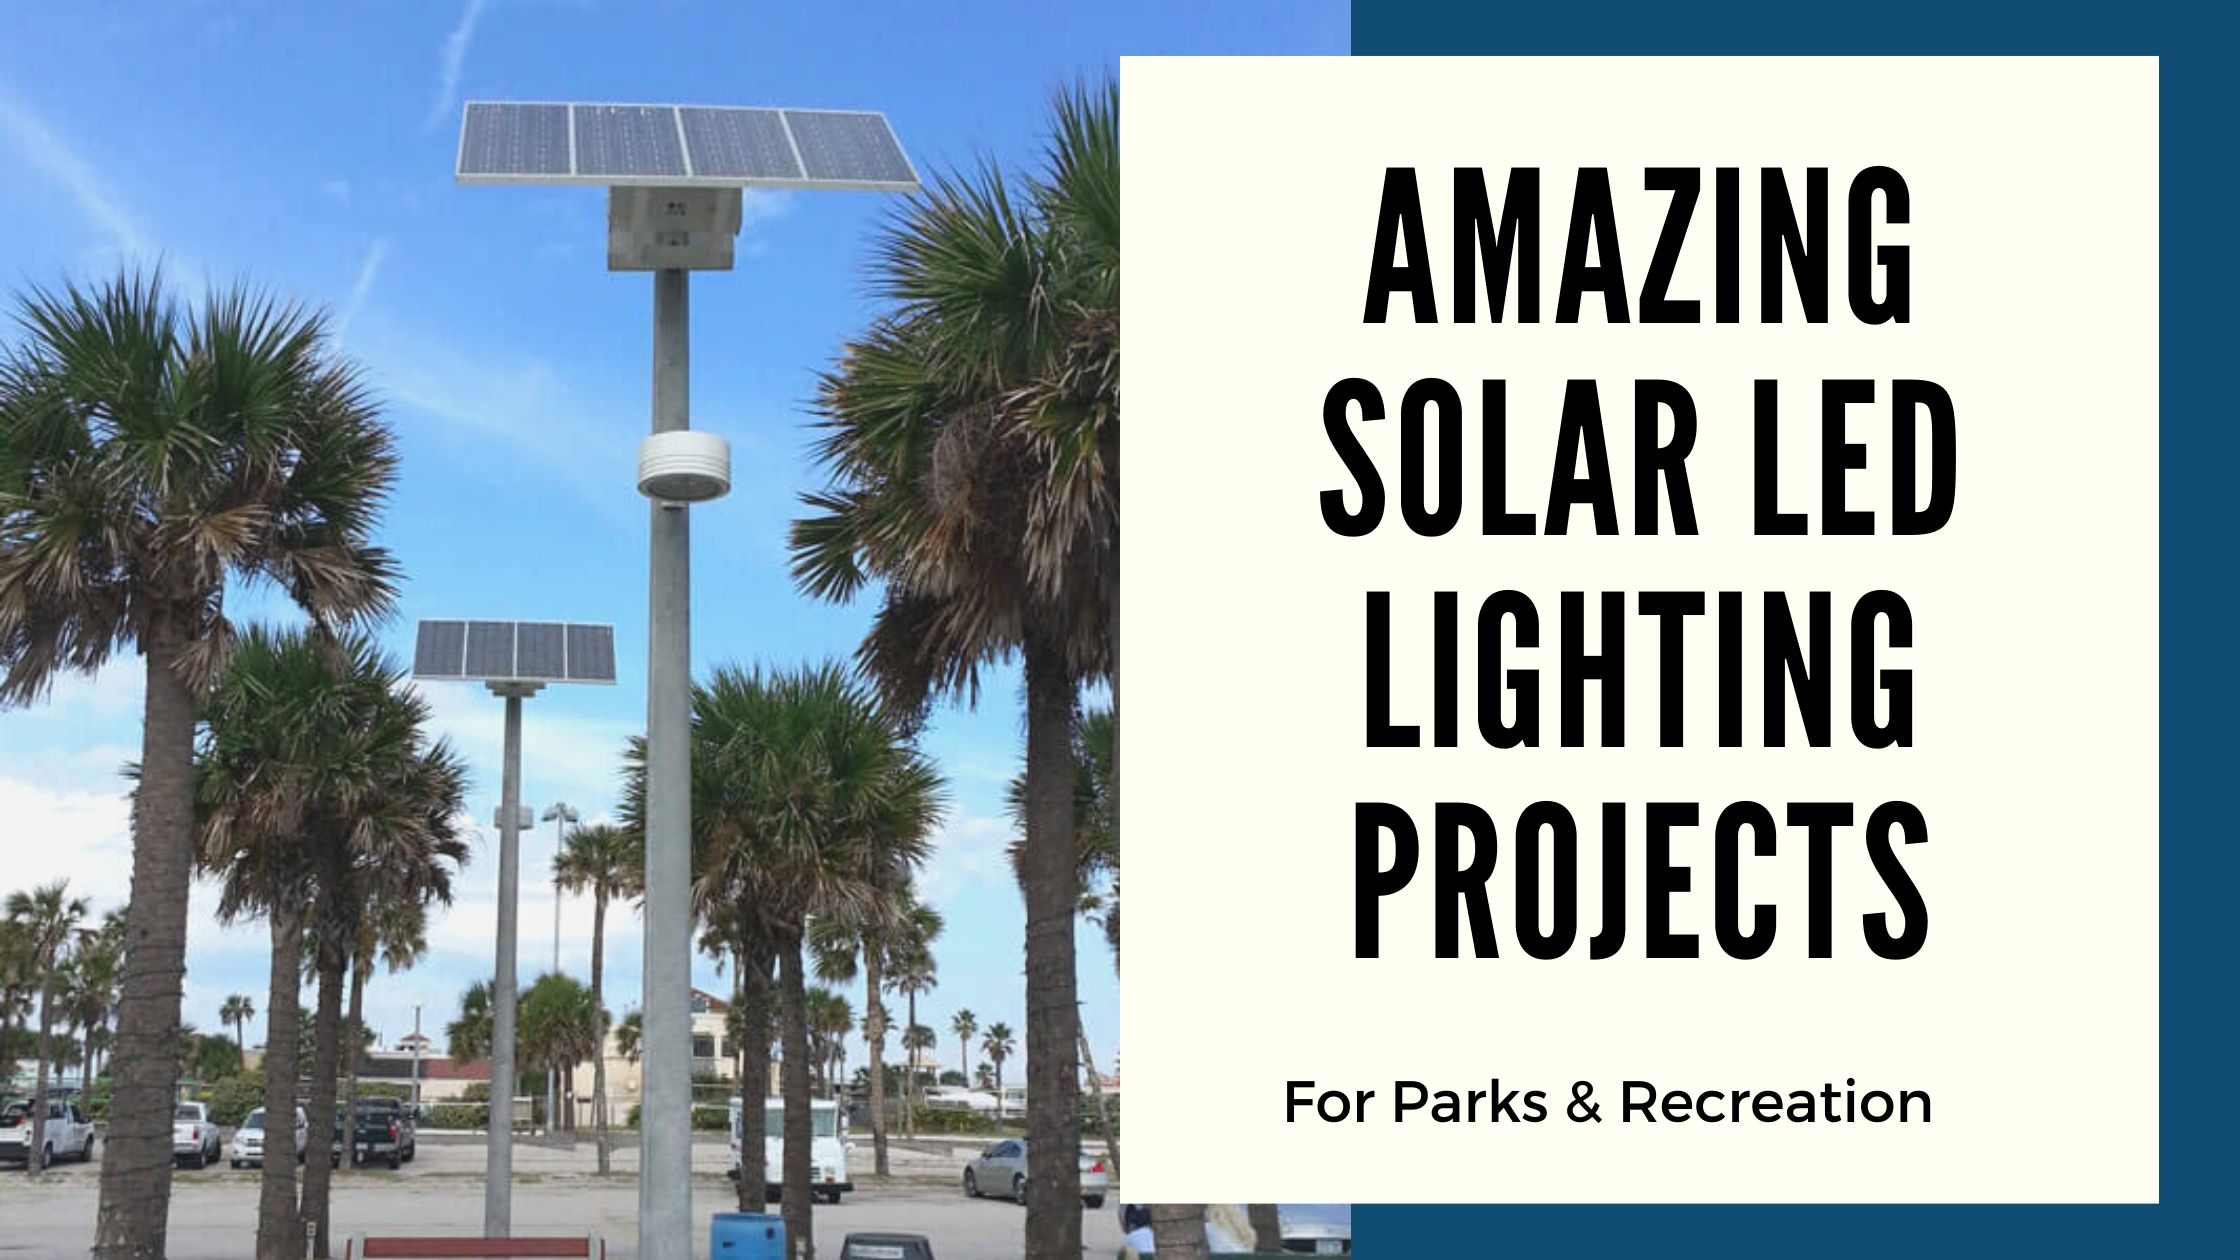 Amazing Solar LED Lighting Projects for Parks and Recreation